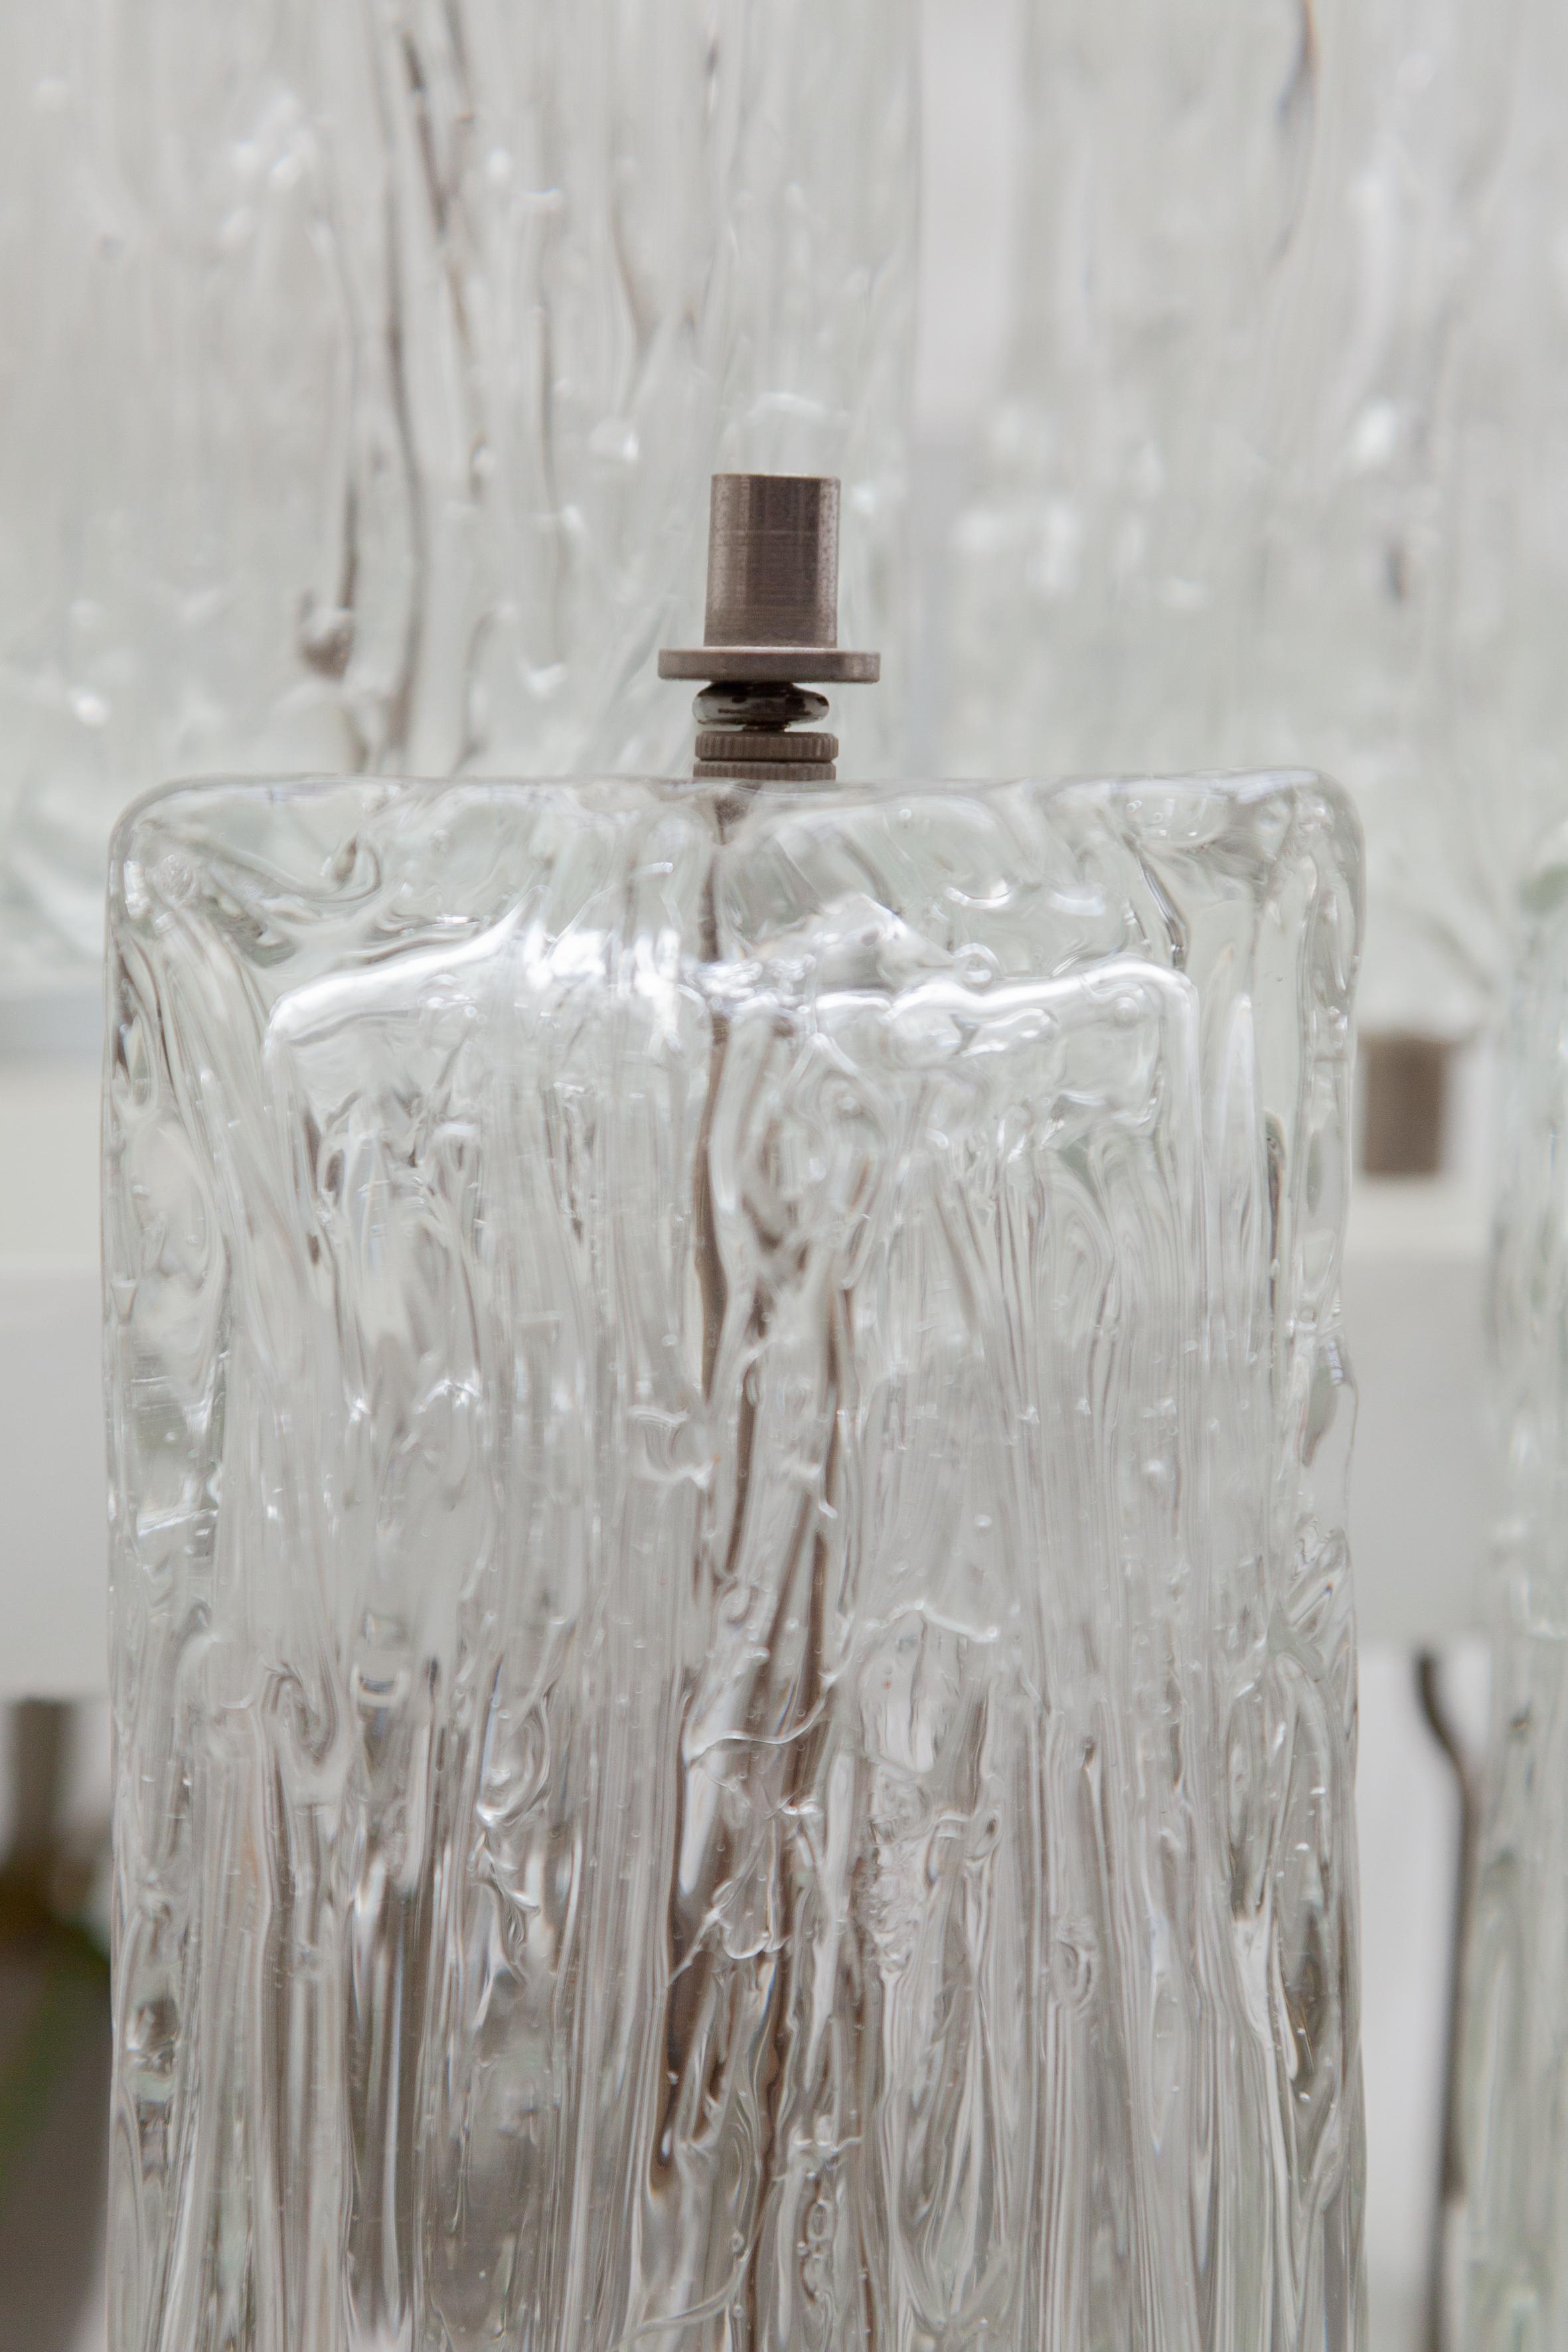 Mid-20th Century Venini Large Chandelier Iced Textured Clear Glass Five Tiers 1960s Murano, Italy